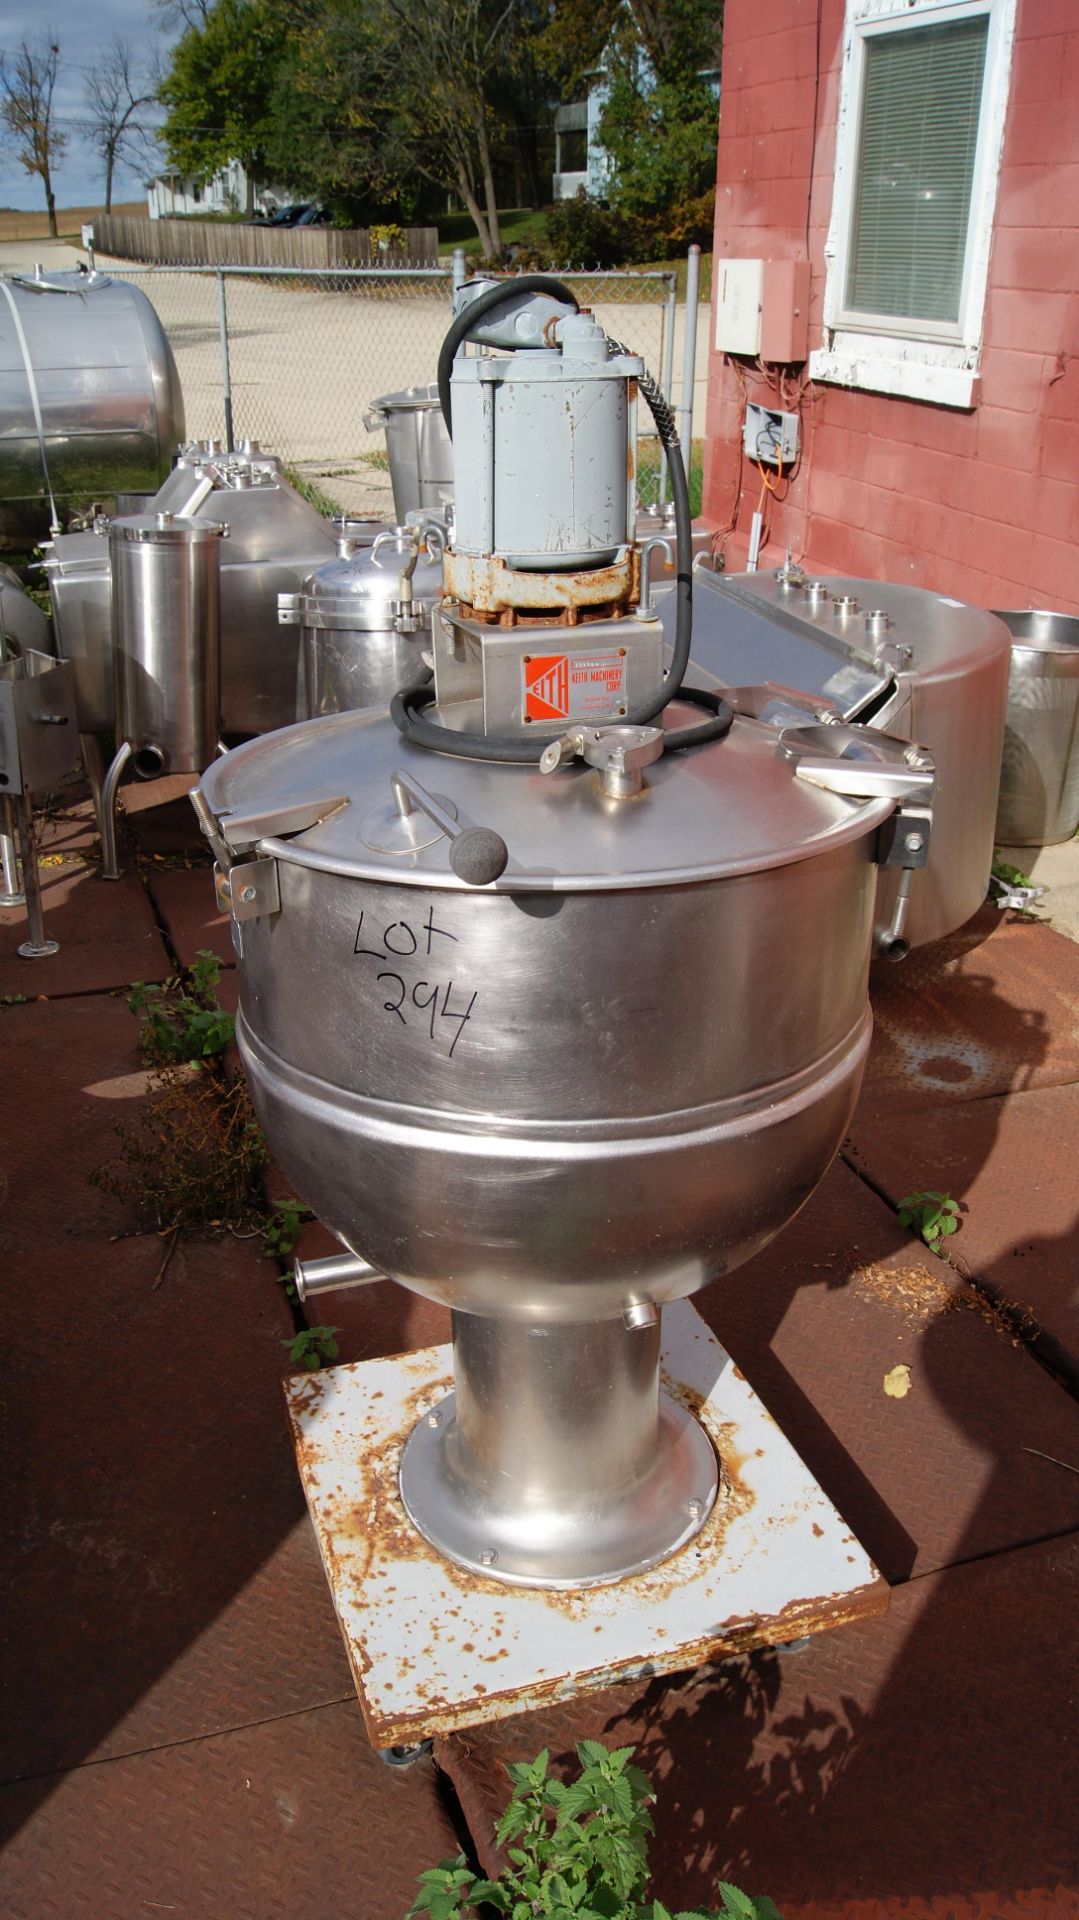 40 Gallon Groen Process Kettle; Trunion Mount on Mild Steel Plate: Single Piece Lift Over with 1/2HP